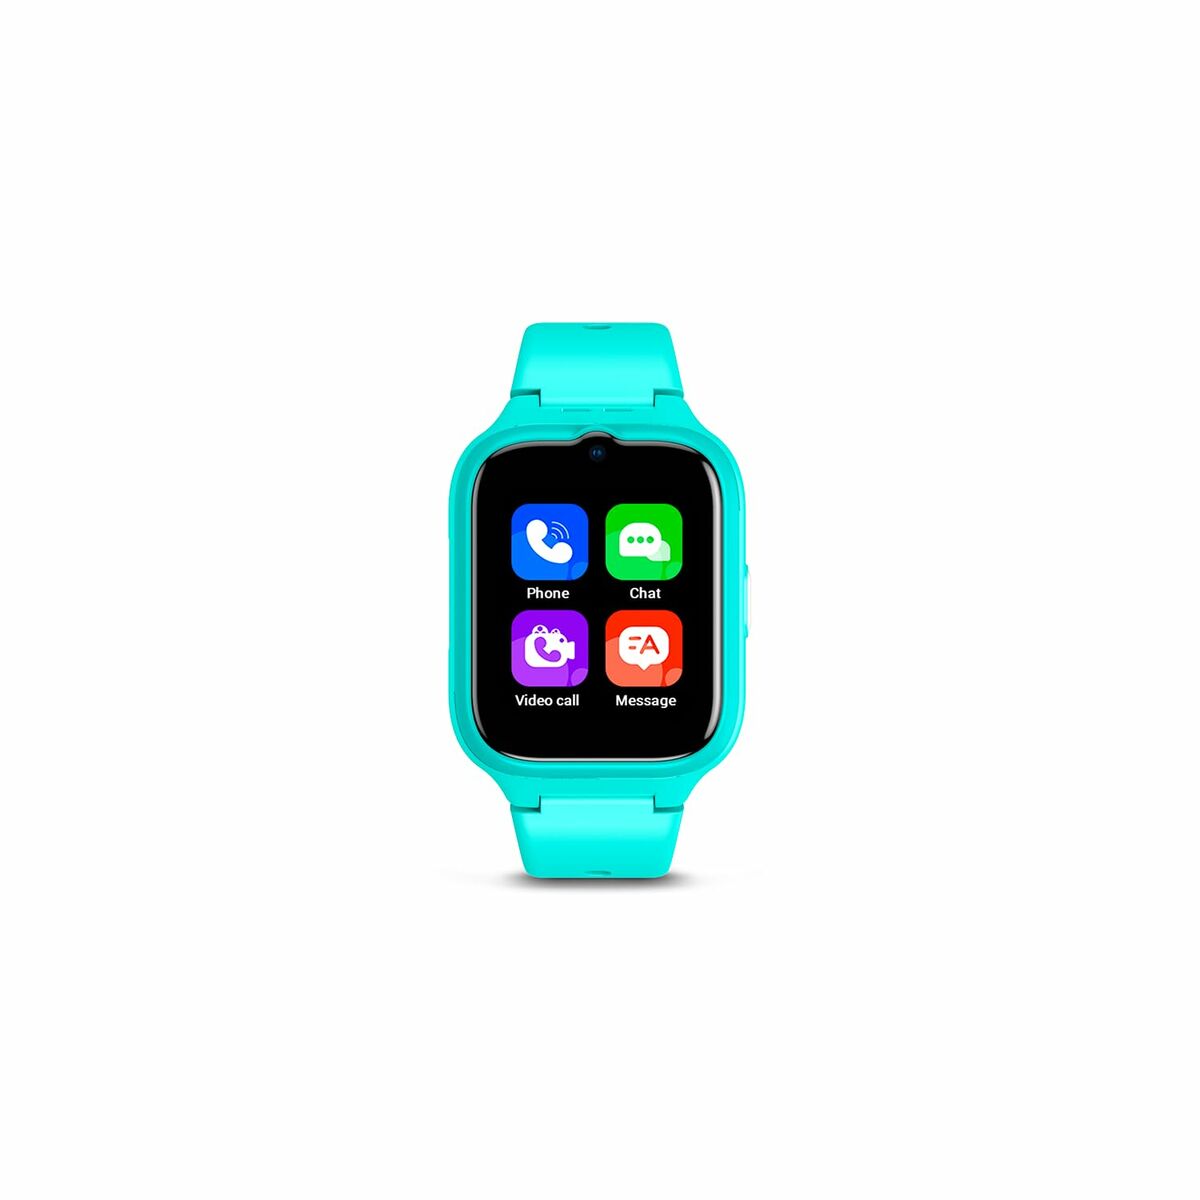 Smartwatch SPC Internet 9641V Green 1,7", SPC Internet, Electronics, smartwatch-spc-internet-9641v-green-1-7, :Green, Brand_SPC Internet, category-reference-2609, category-reference-2617, category-reference-2634, category-reference-t-19653, category-reference-t-4082, Condition_NEW, original gifts, Price_100 - 200, telephones & tablets, Teleworking, wifi y bluetooth, RiotNook